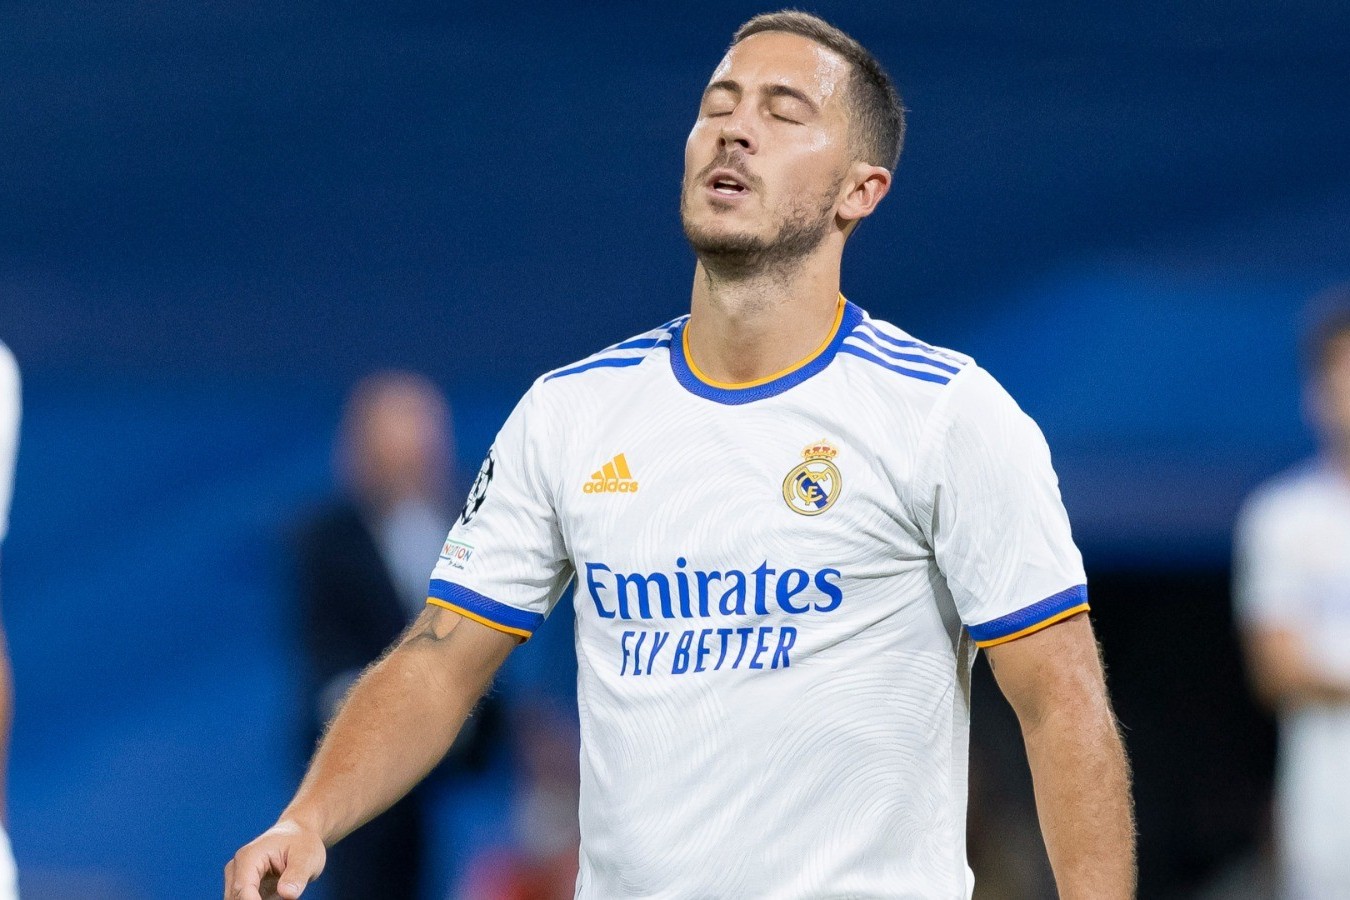 Hazard explained the reason for failure in Real: "Barbecue, red wine..."